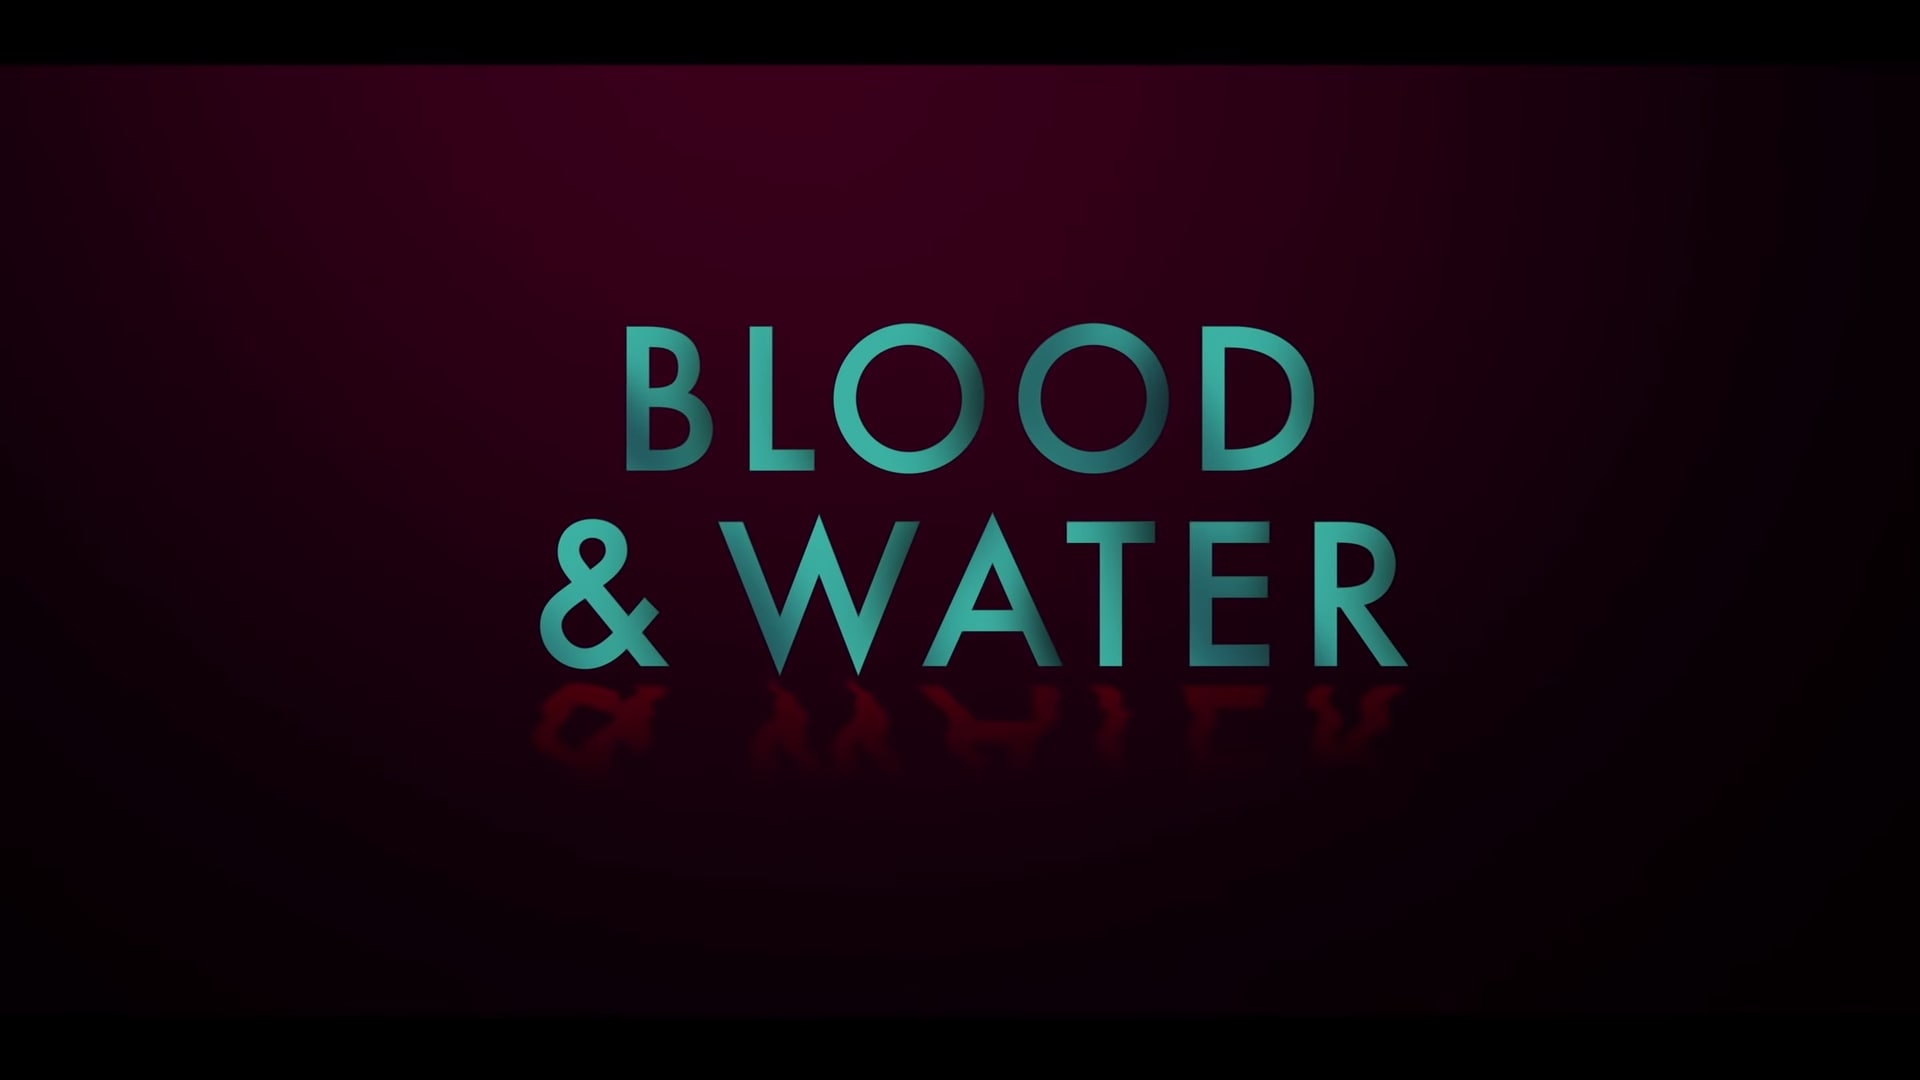 Netflix Blood and Water Season 2 Trailer, Coming to Netflix in October 2021